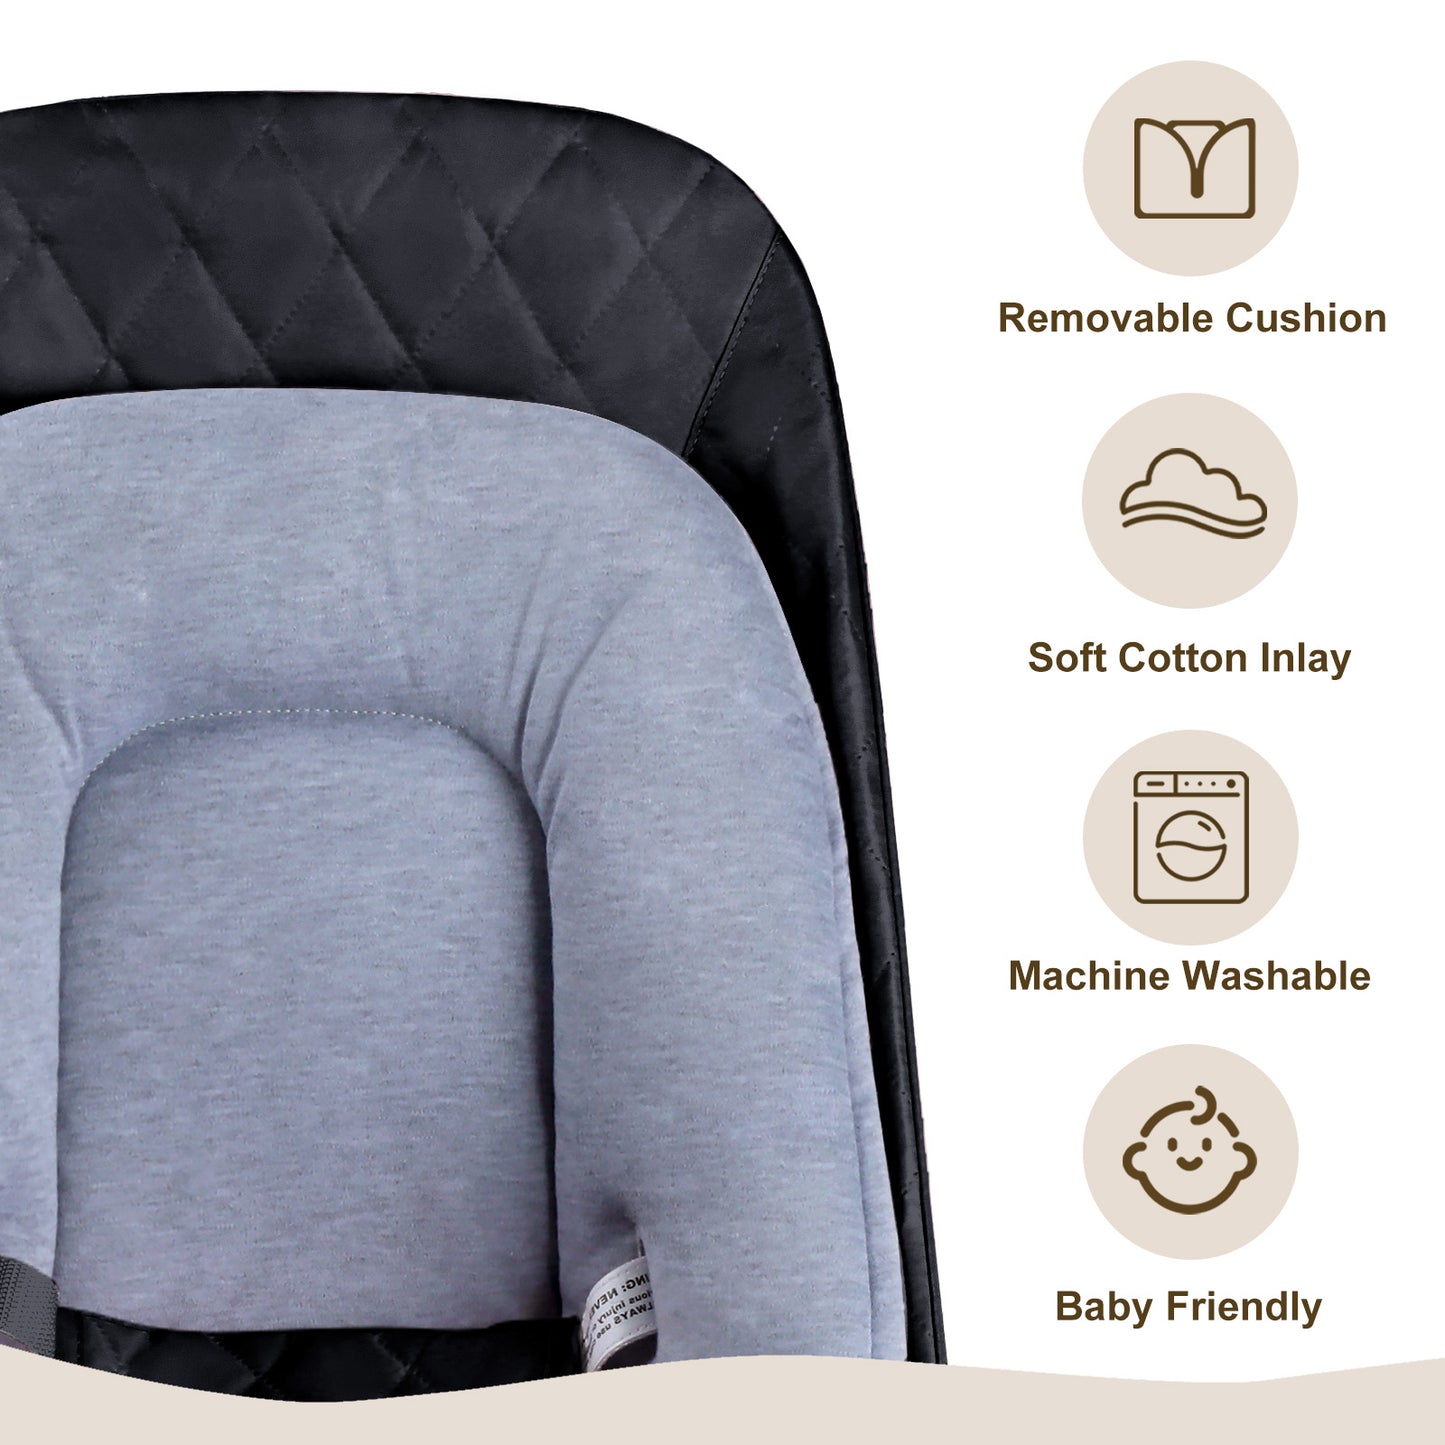 Baby Bouncer for Infants 3 in 1 Folding Baby Rocker Seat Unisex Lounge Chair, Black